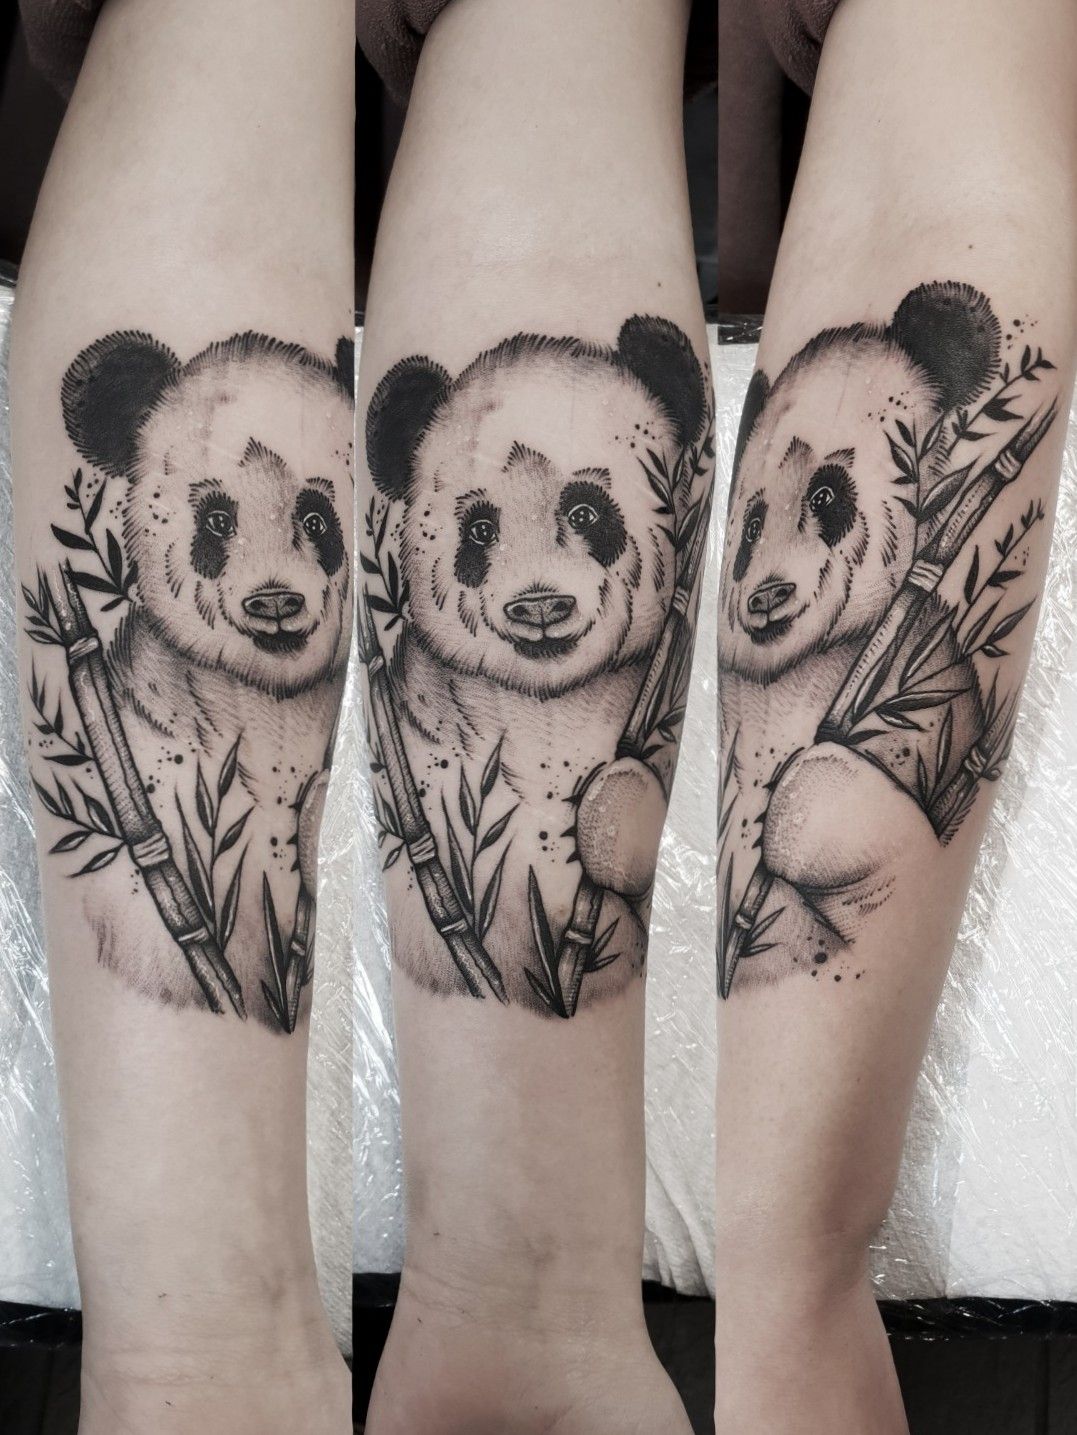 Kung Fu Panda half sleeve in the Irezumi Style Still needs one more  session for shading Color or blackwhite Done by Matthew Tran at  Playhouse Tattoo Studio Mississauga Ontario Canada  rtattoos